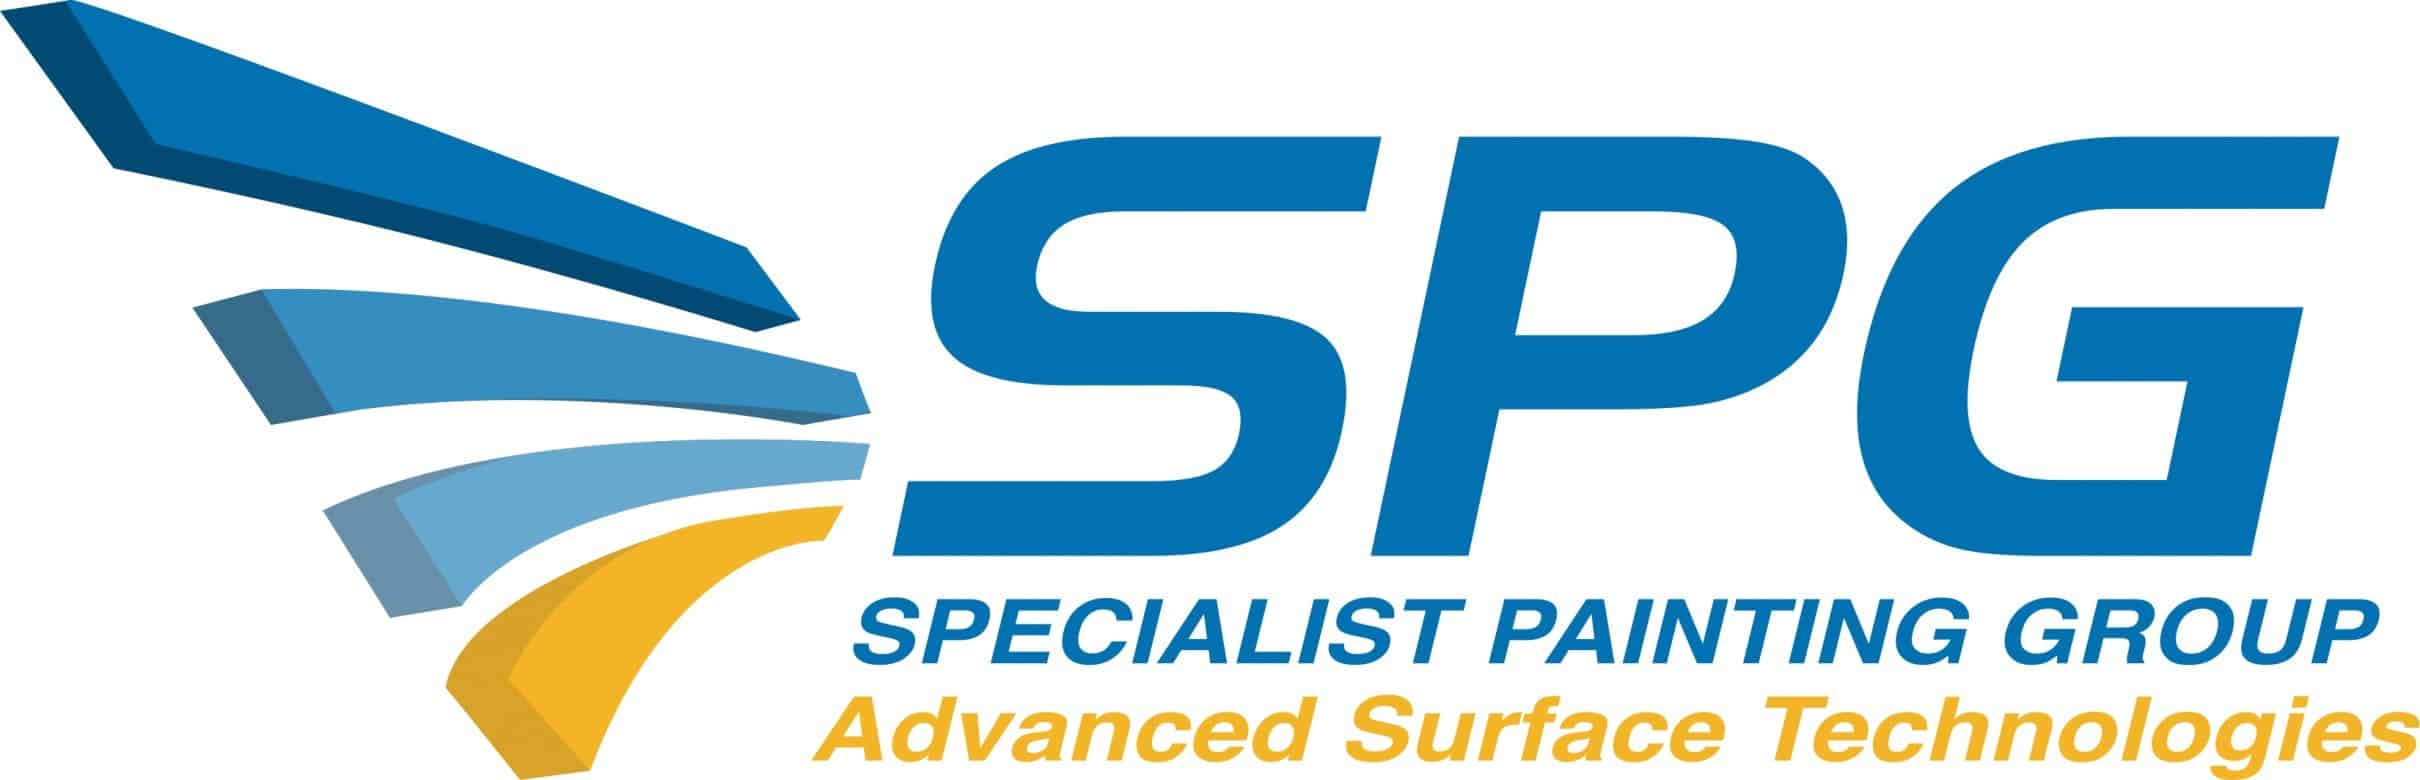 SPG (Specialist Painting Group) Ltd